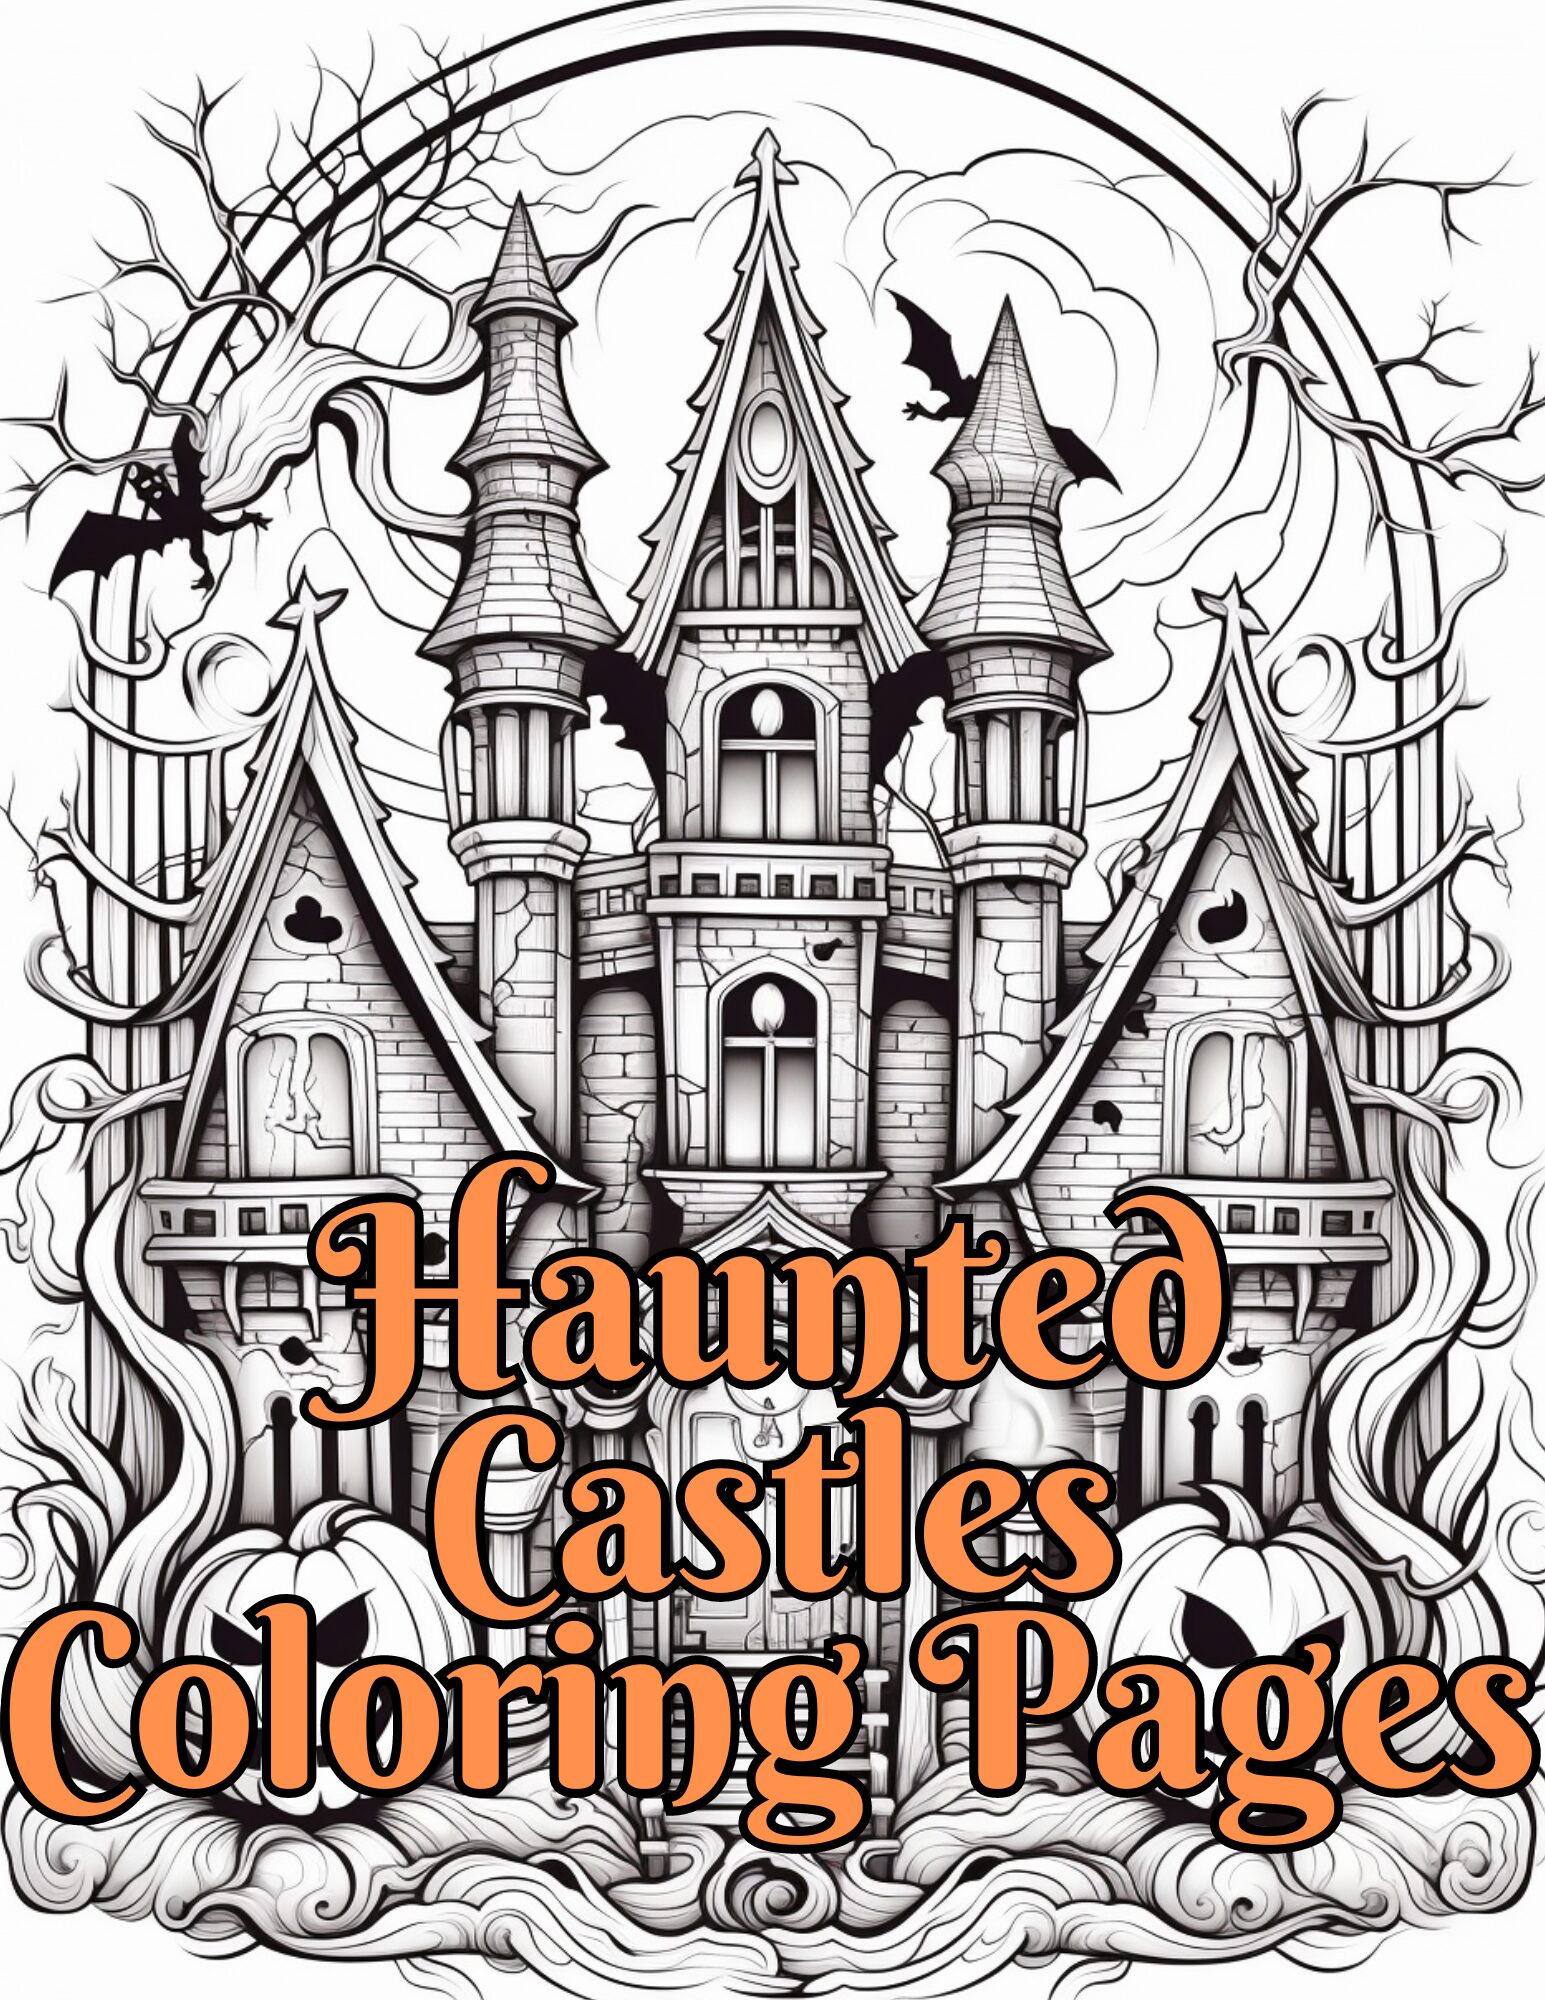 Comfy Digitals is a website that offers free digital downloads such as planners, notebooks and coloring books.